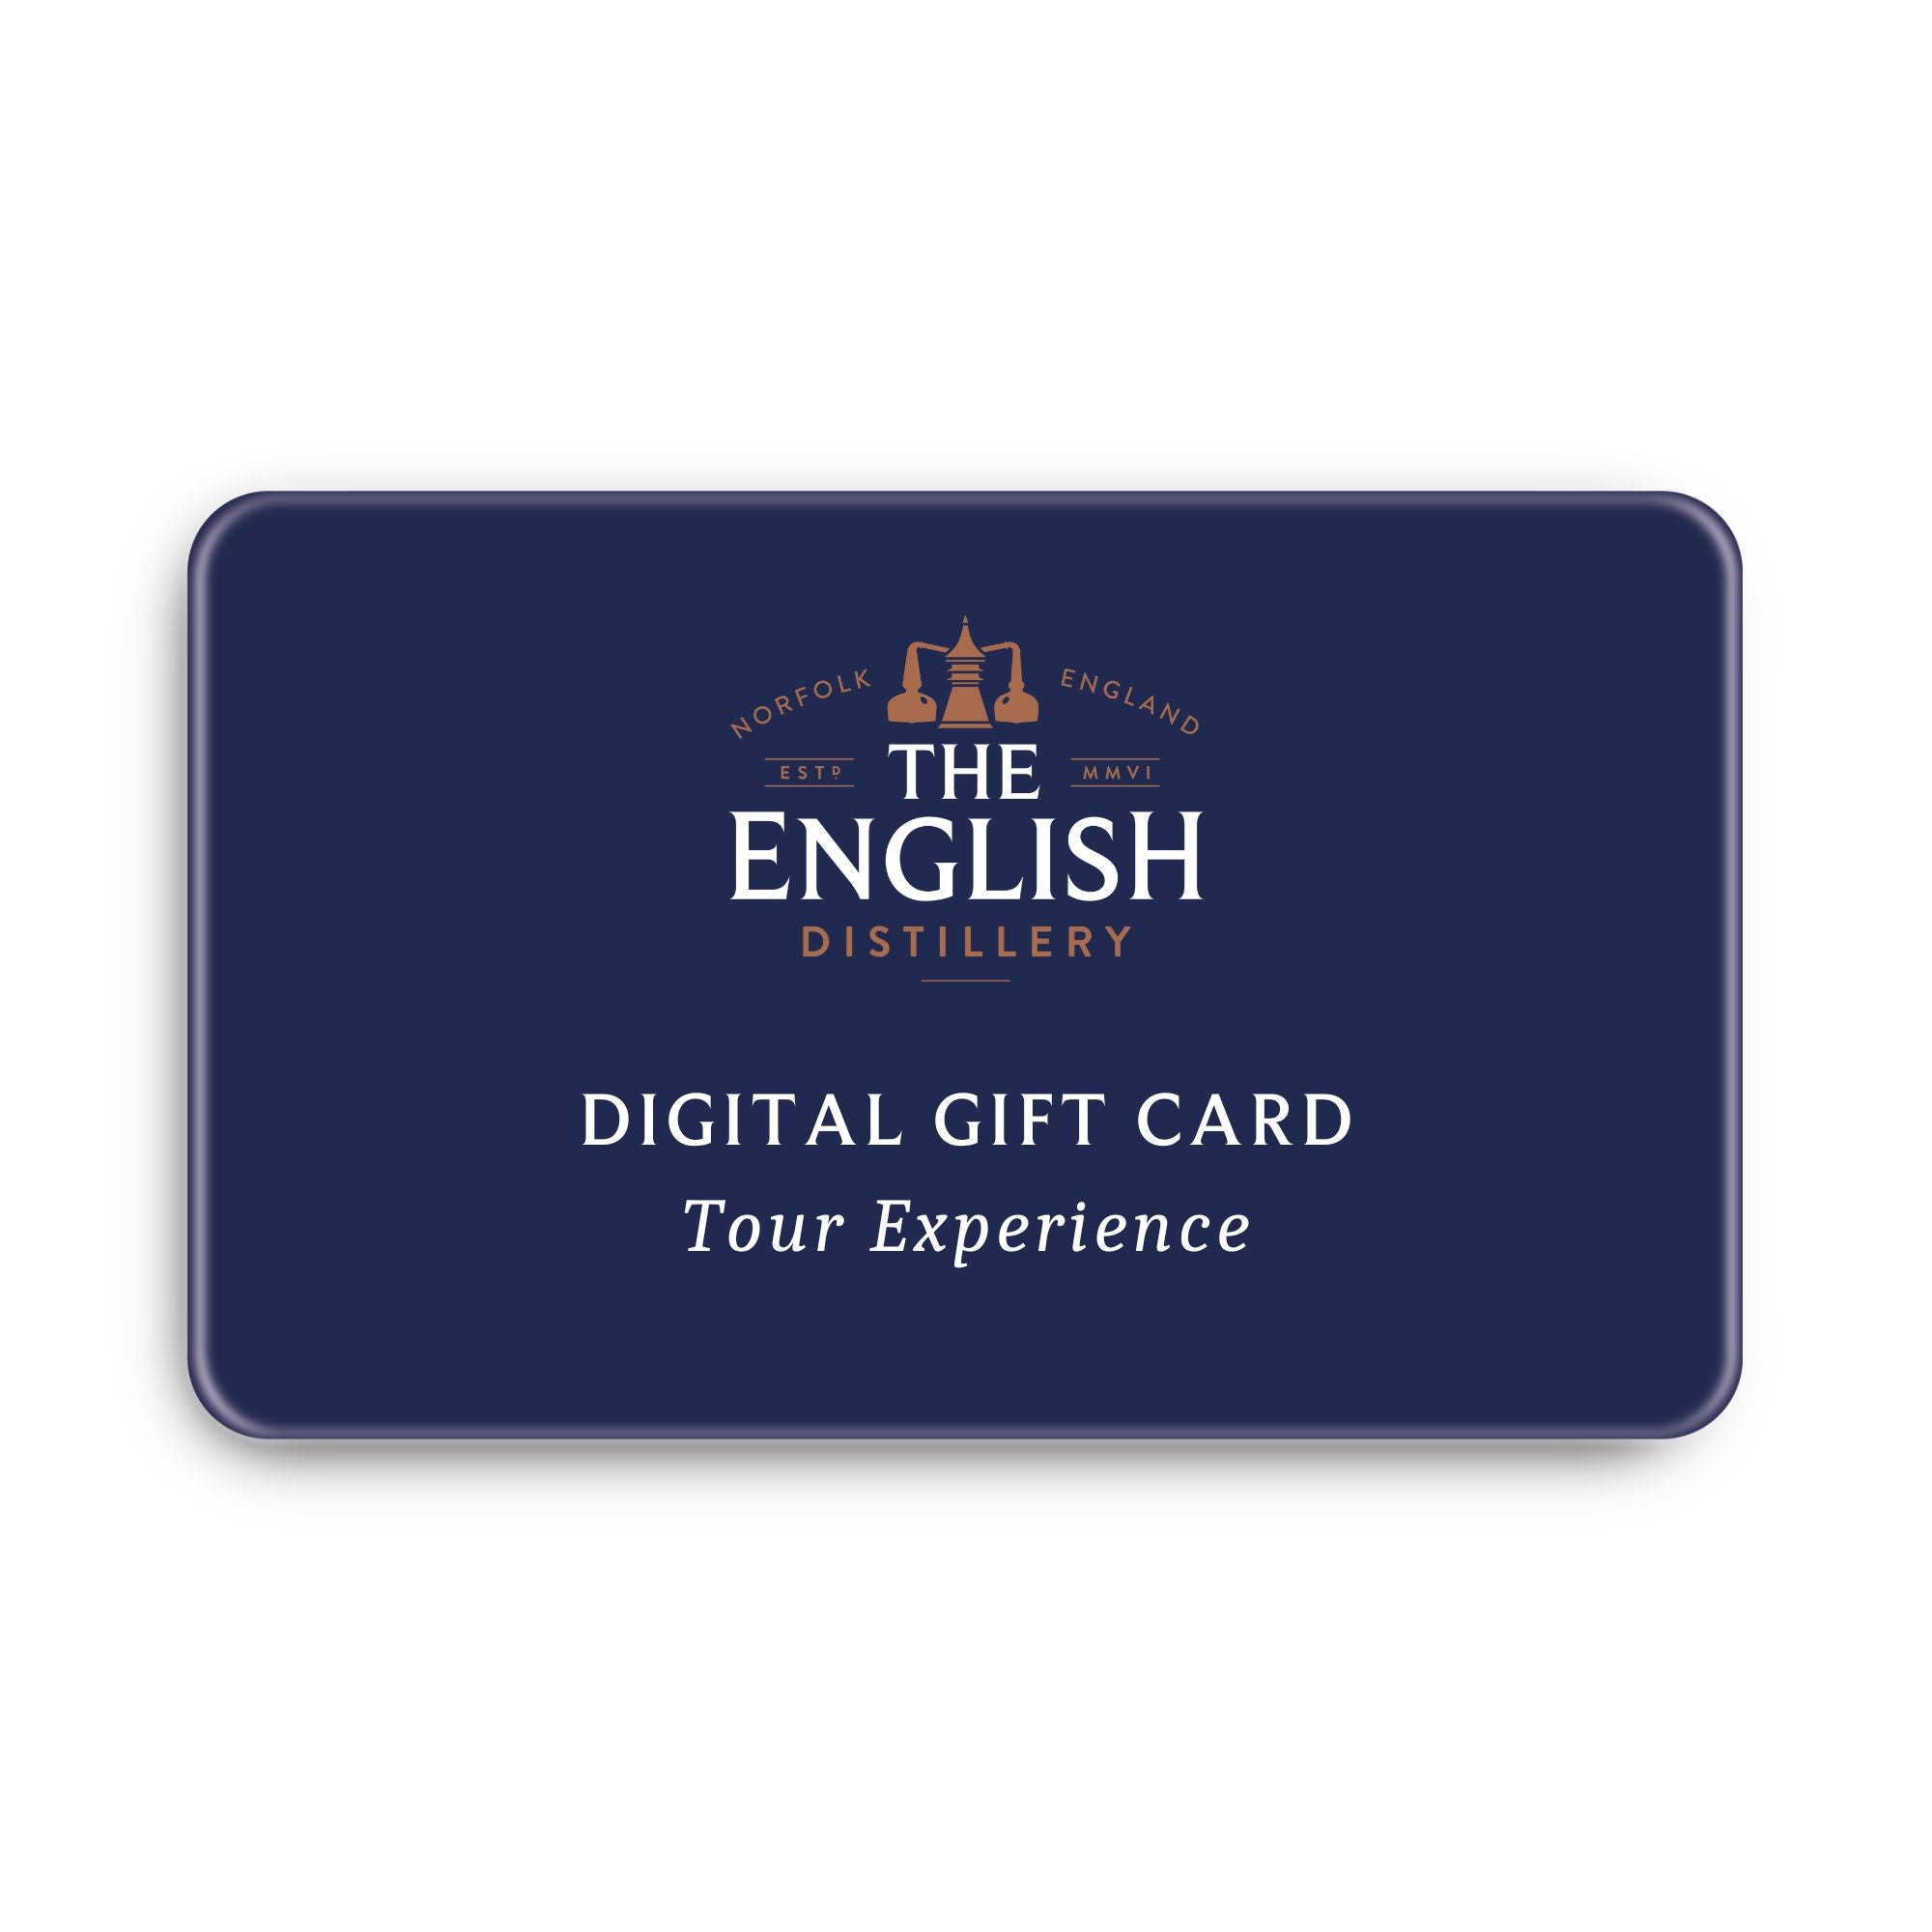 Digital Gift Card - Tour Experience